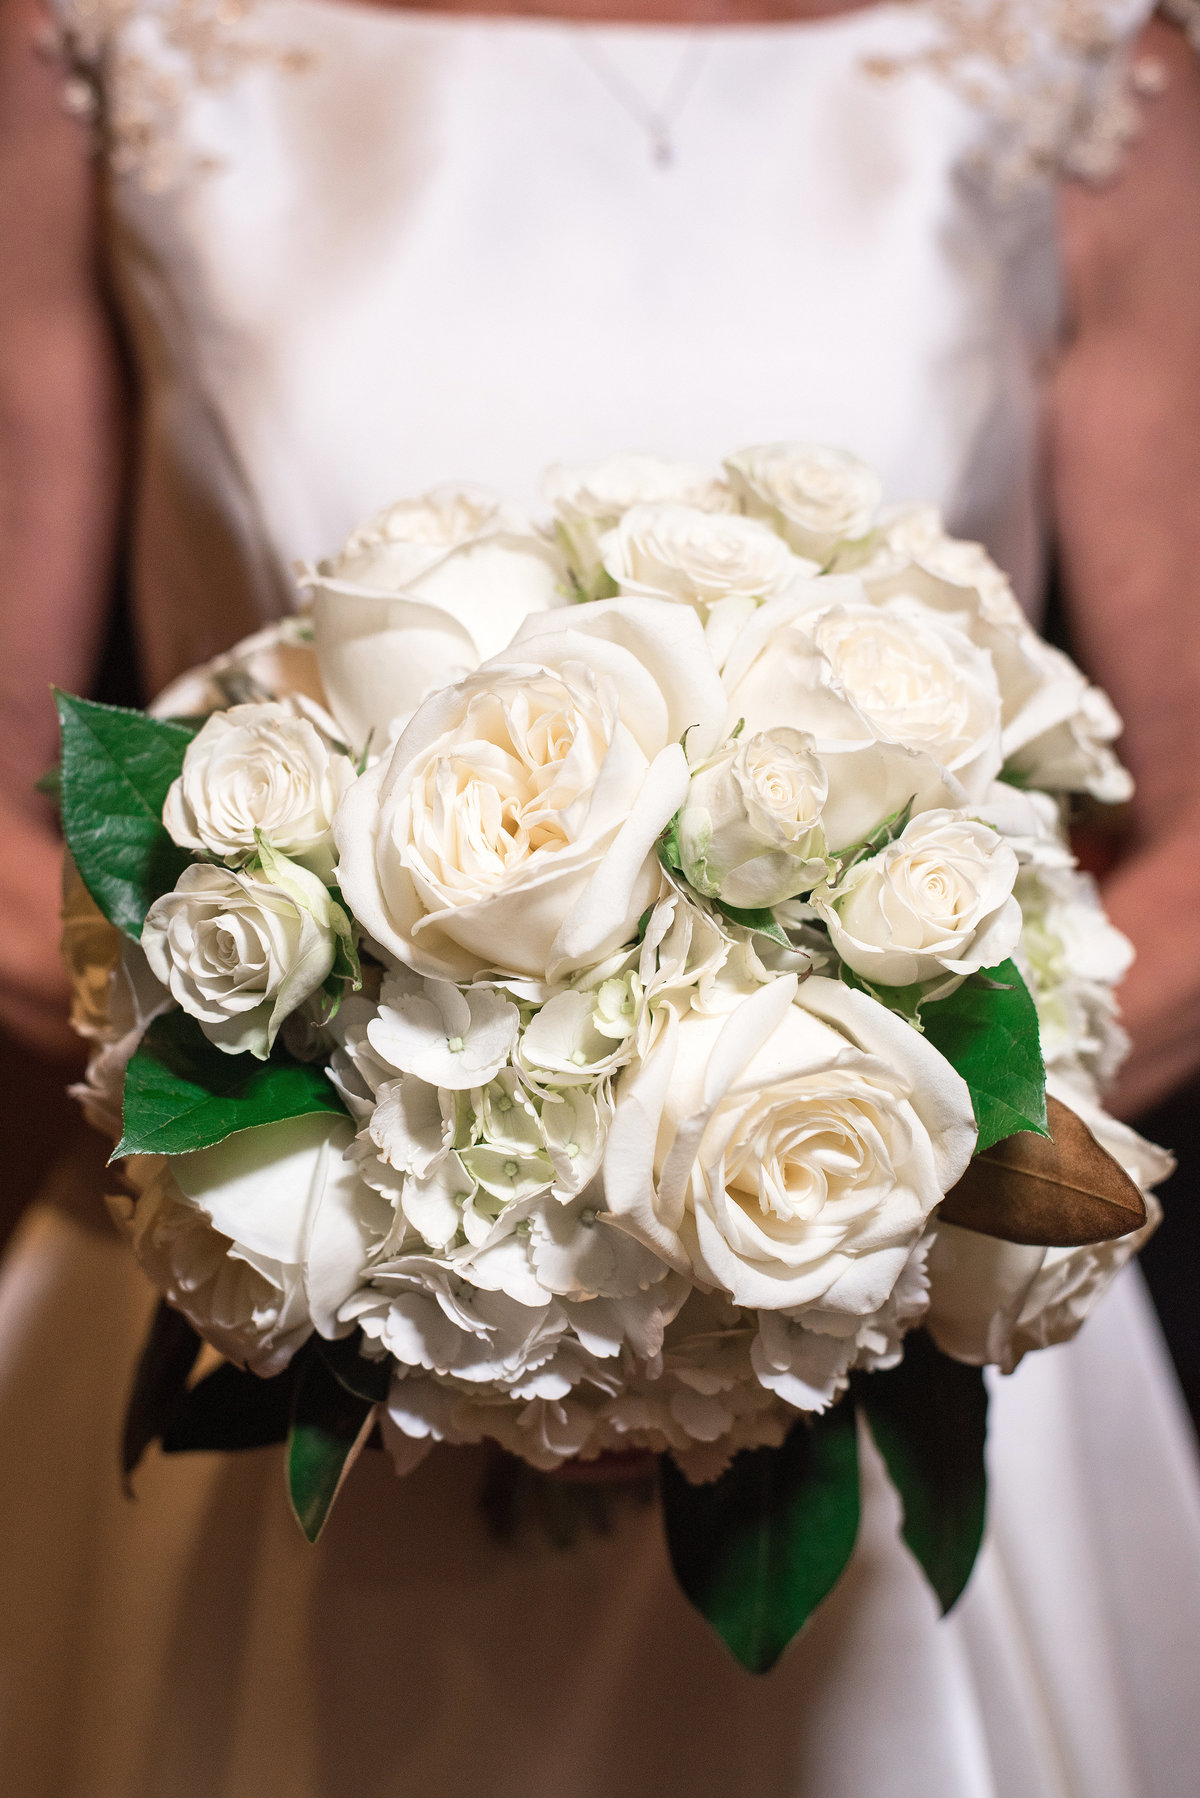 Detail image of a large round white bridal bouquet made up of white roses, white hydrangea, white tea roses and lemon leaf.